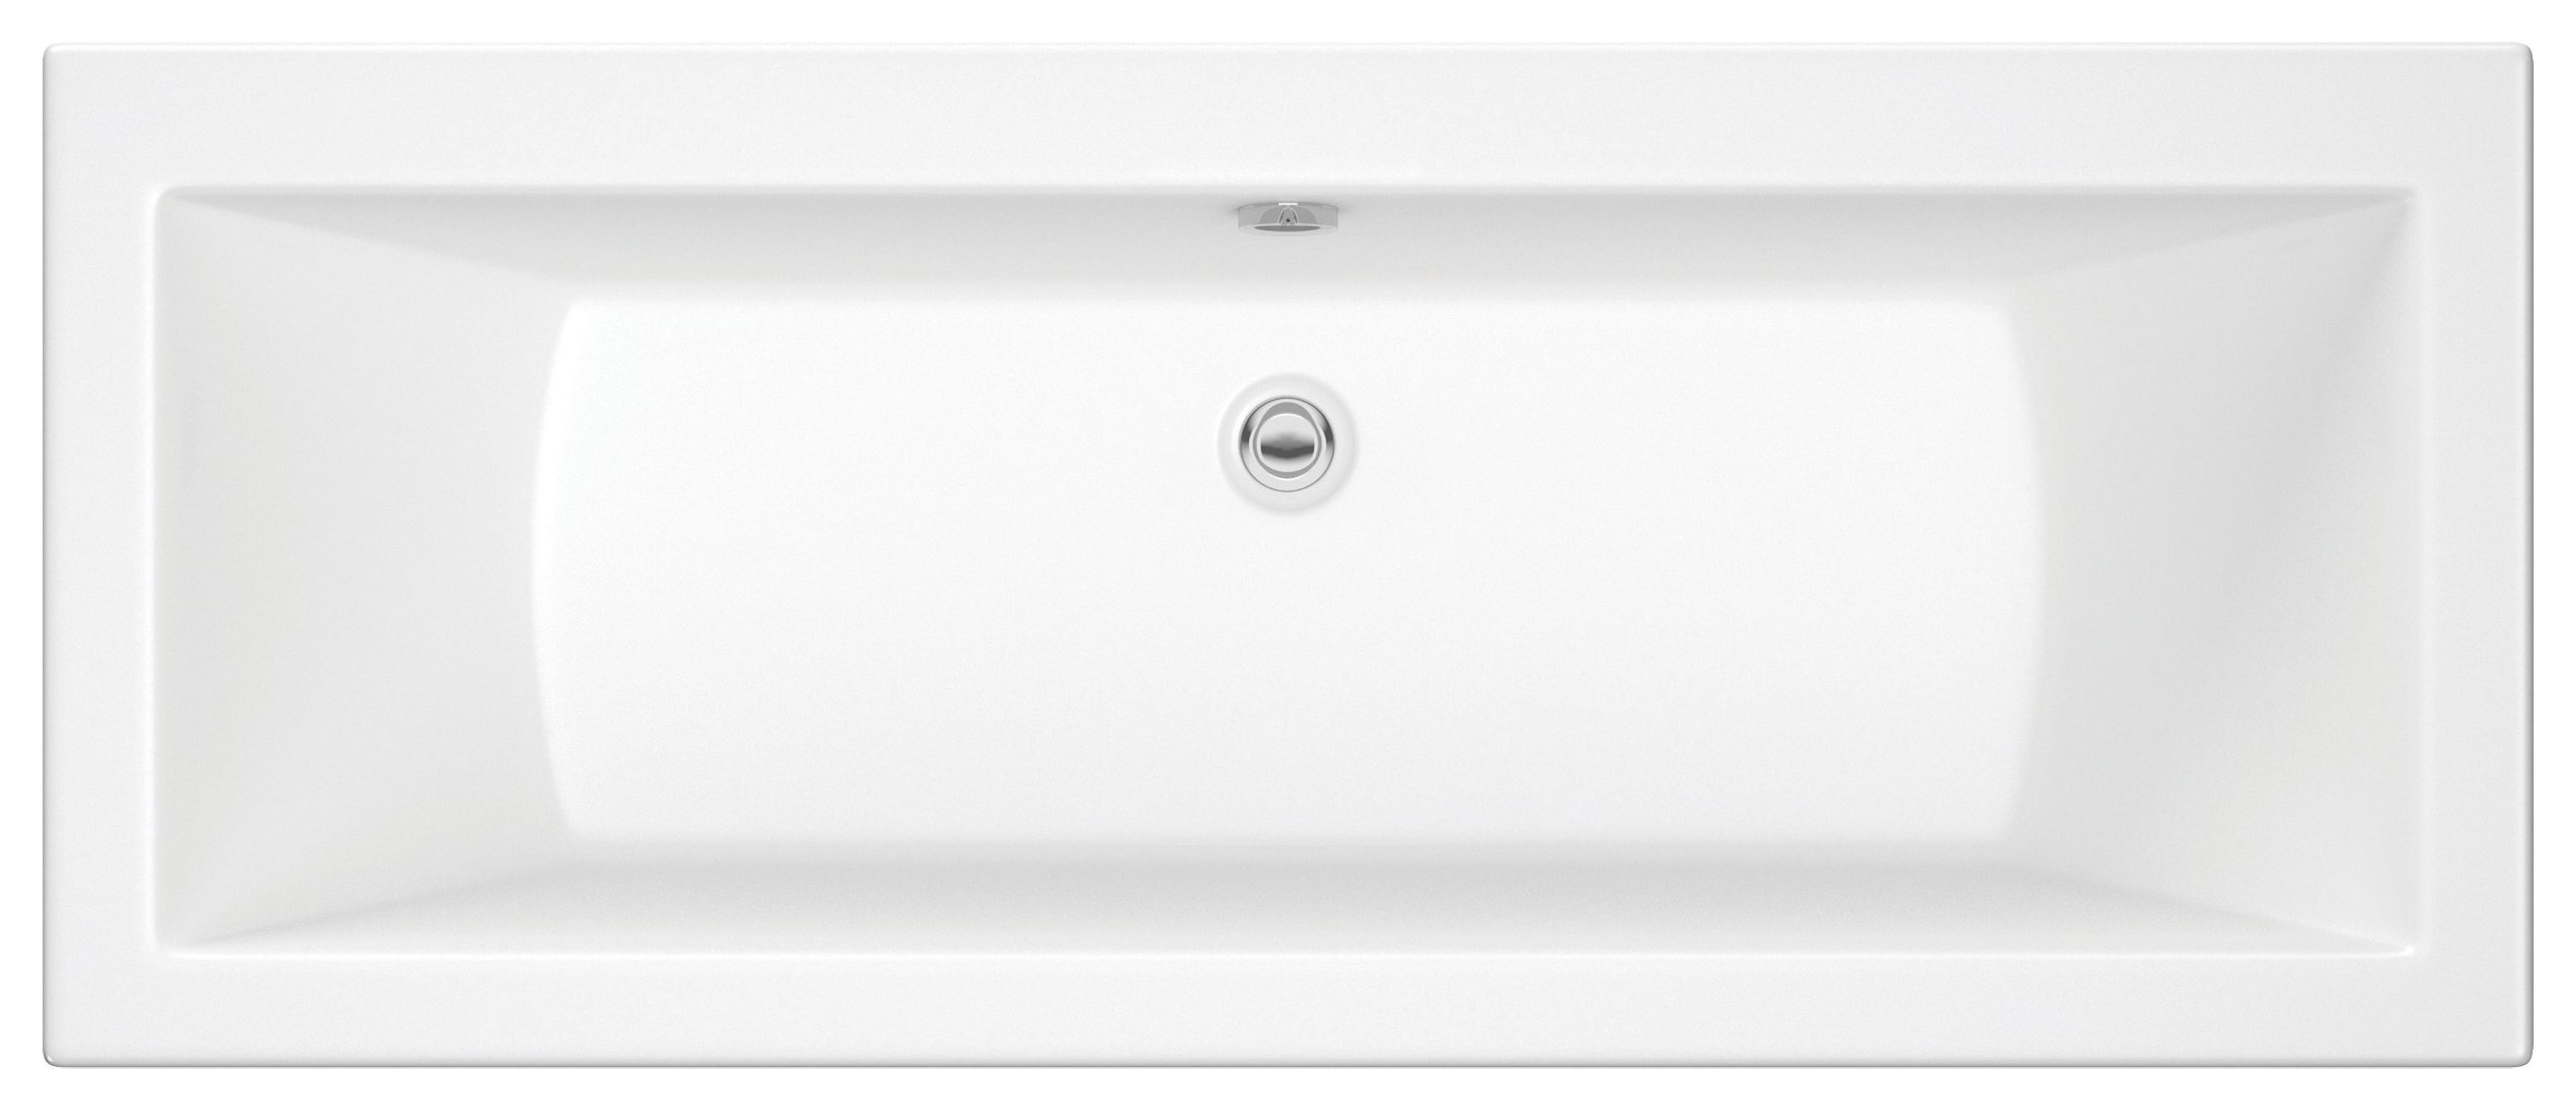 Image of Wickes Camisa Double Ended Bath - 1800 x 800mm